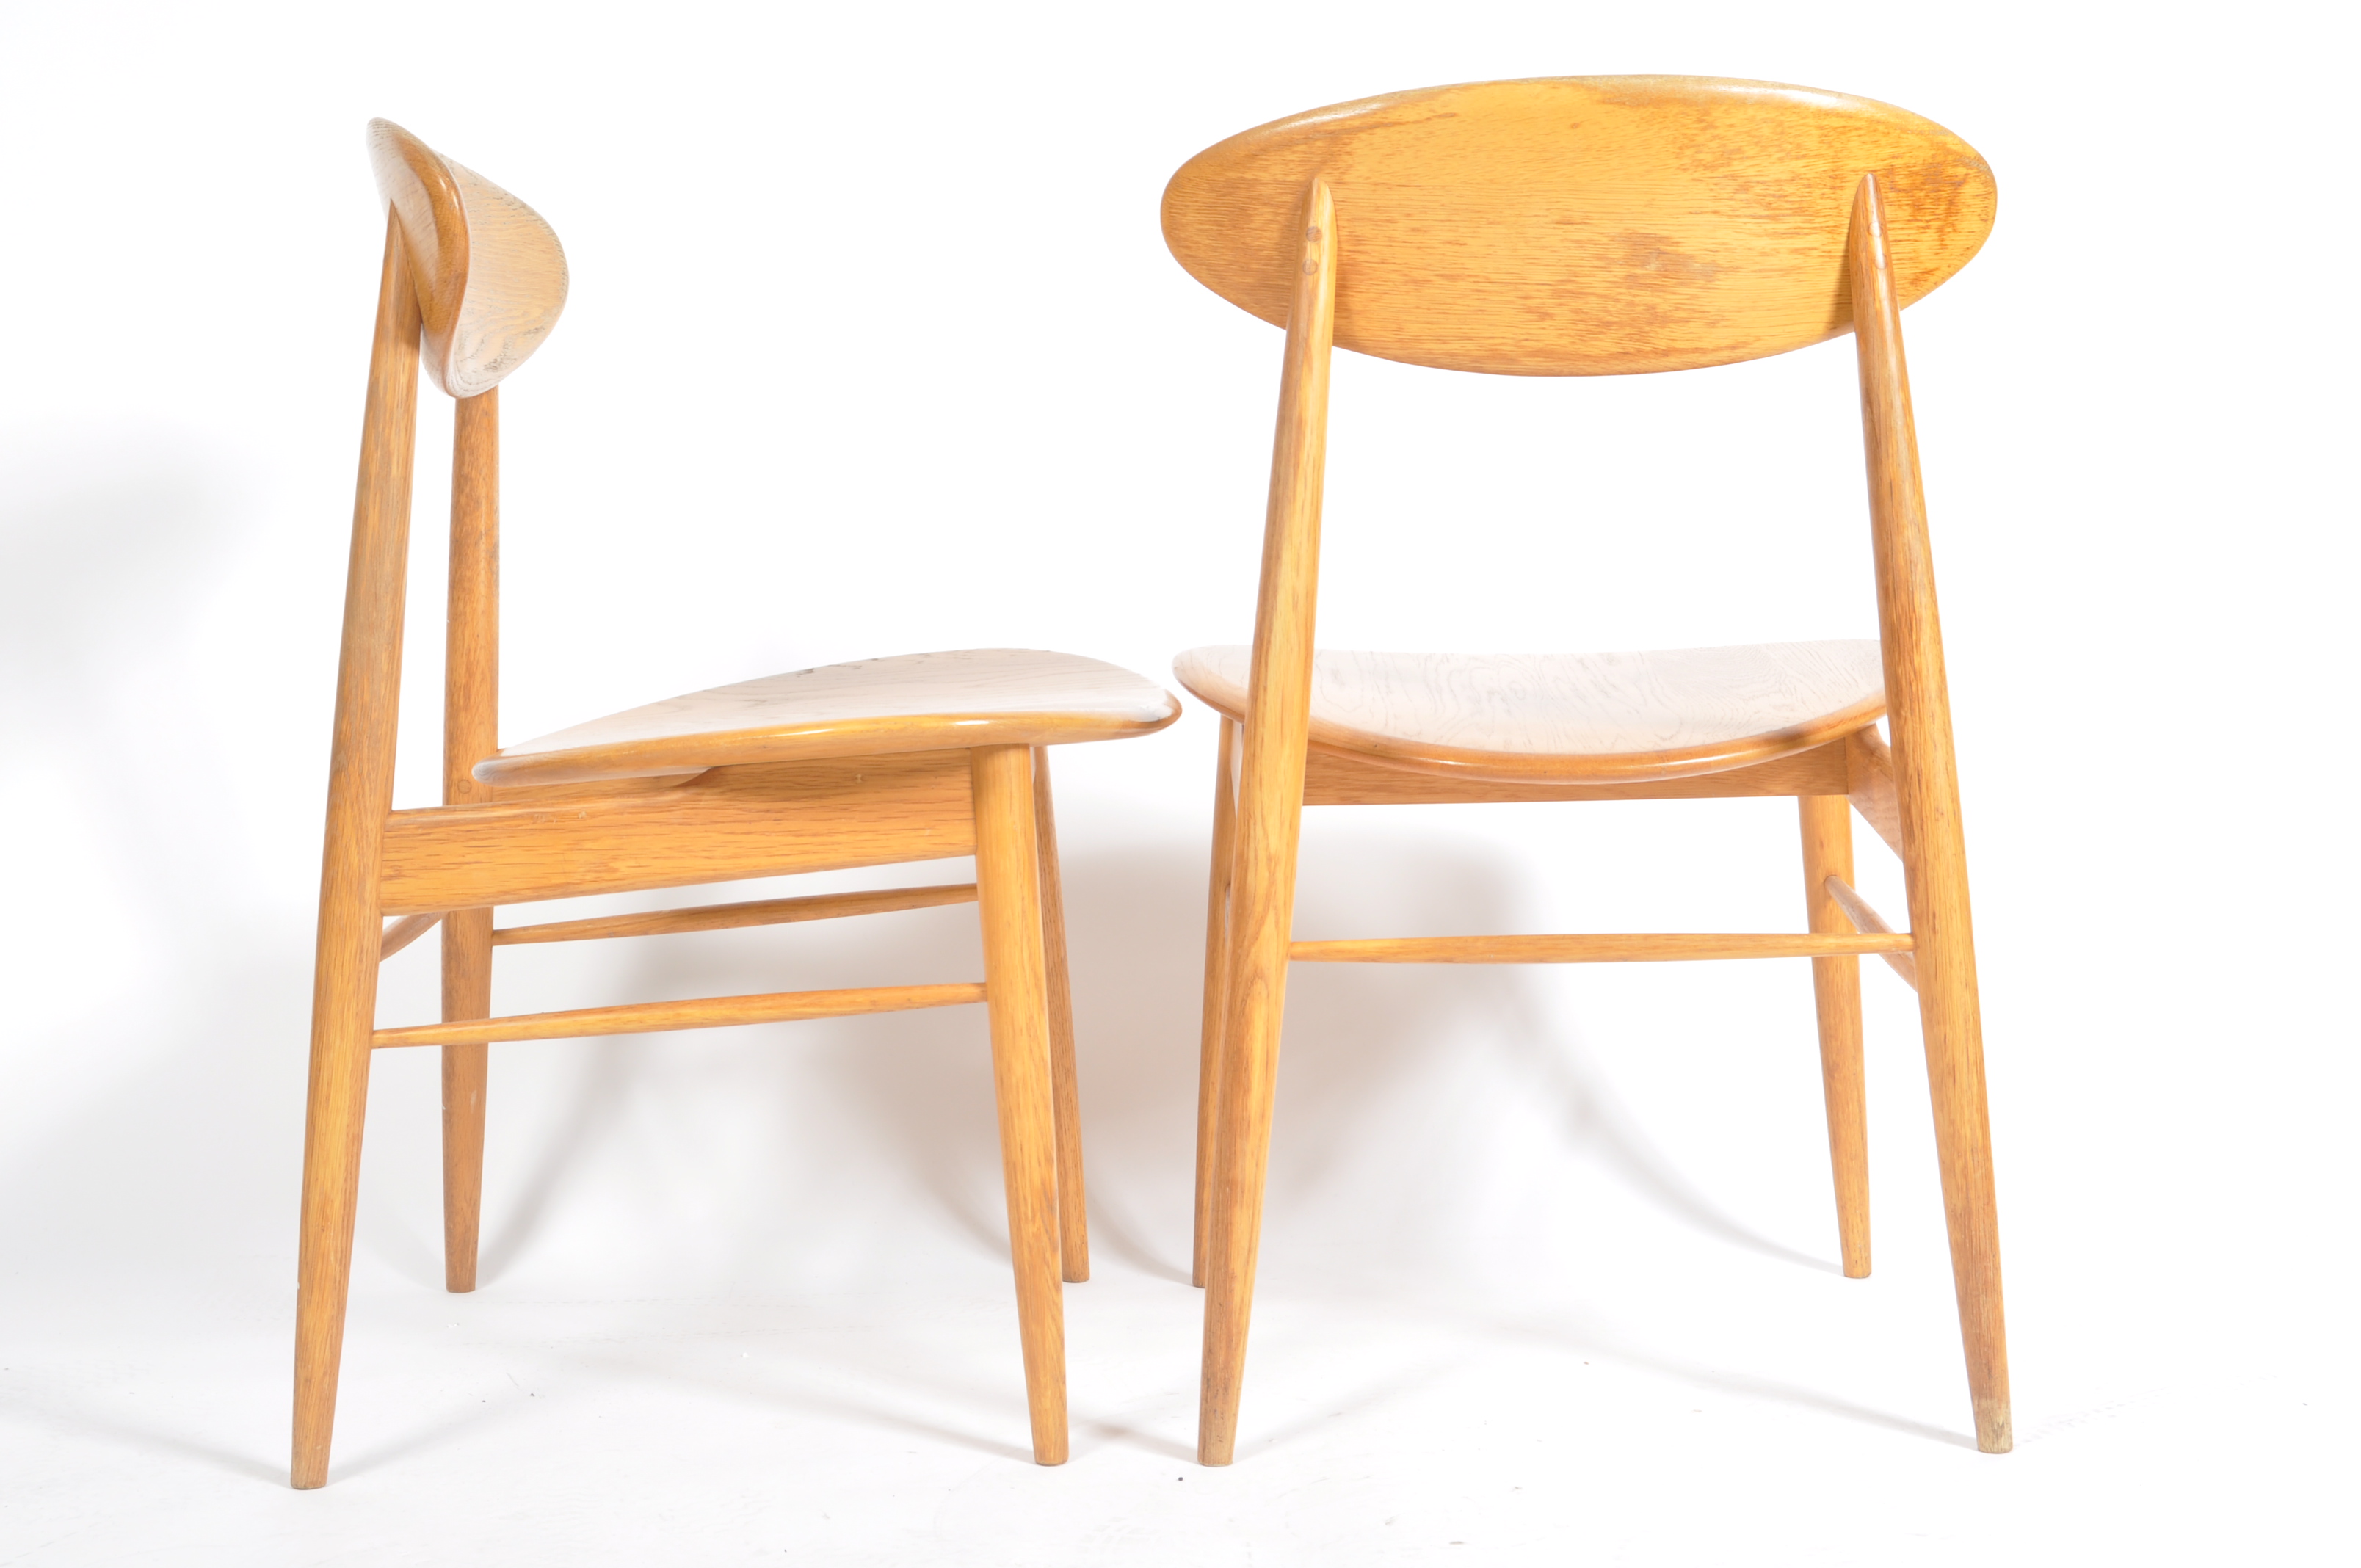 SET OF FOUR RETRO ELM DINING CHAIRS / SIDE CHAIRS - Image 8 of 8